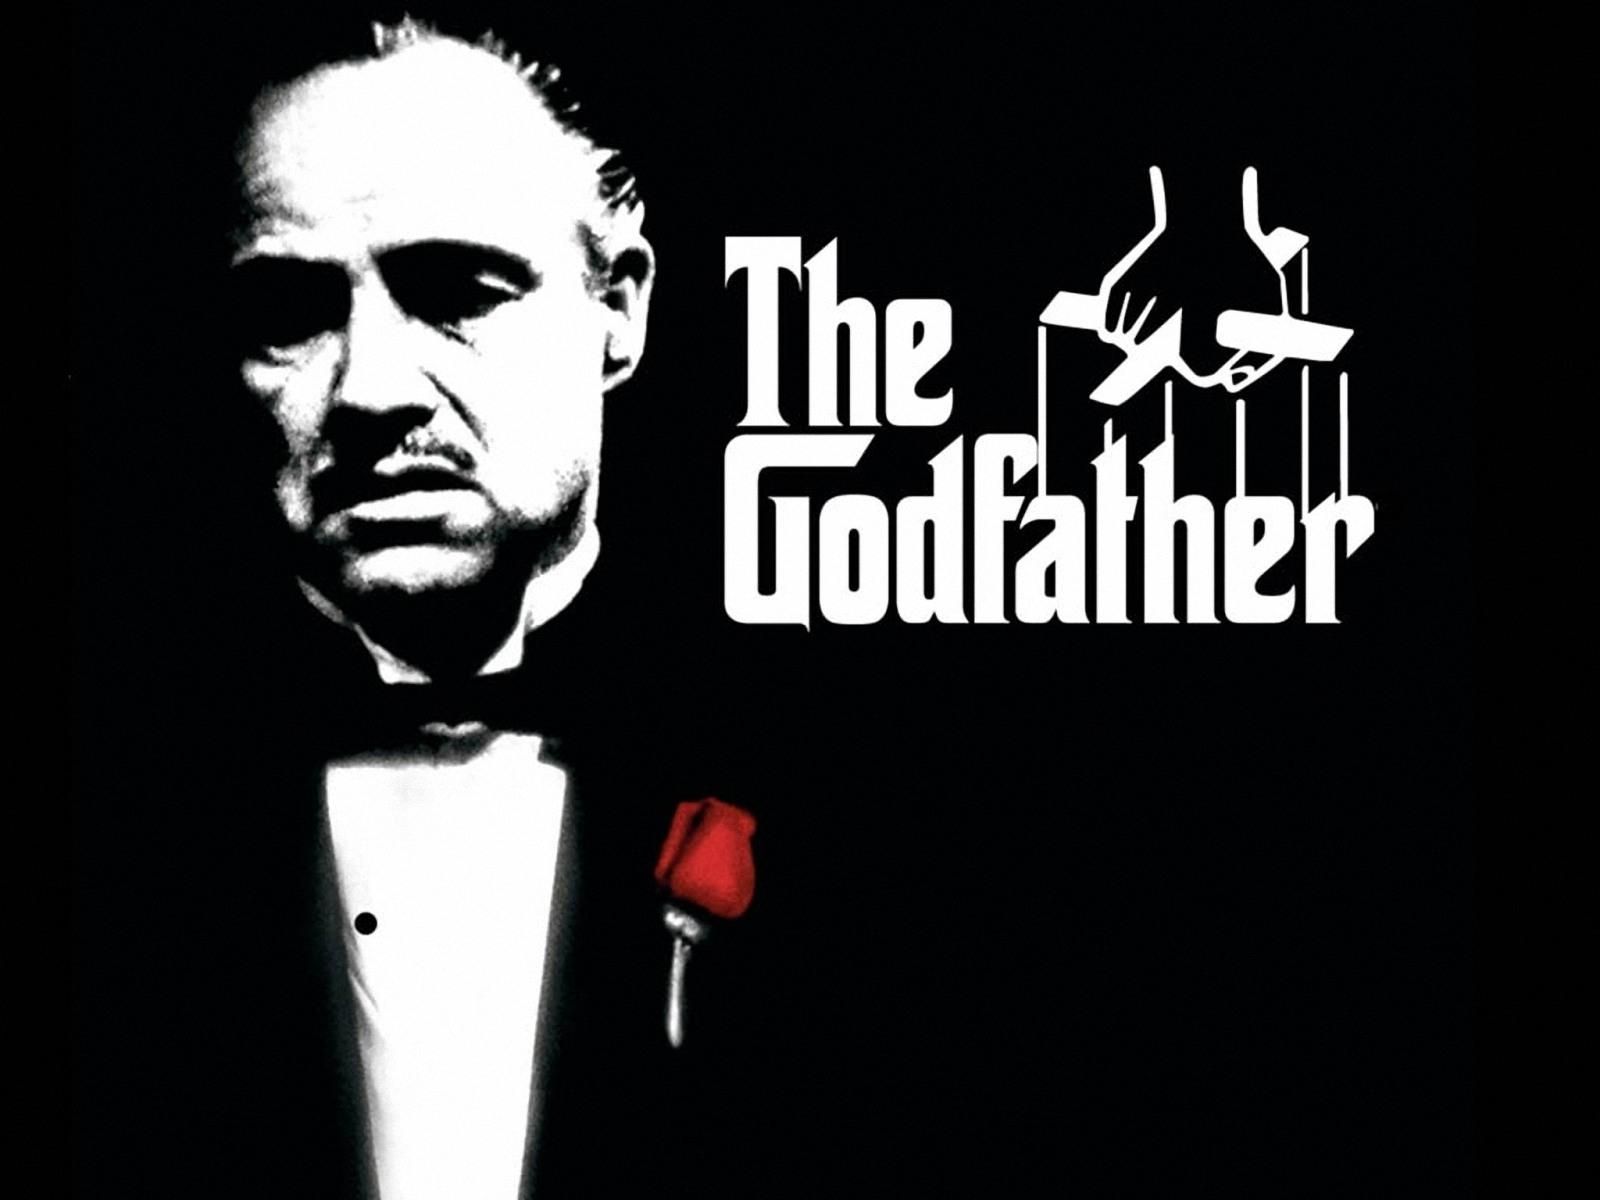 Godfather wallpaper Wallpapers - Free godfather wallpaper